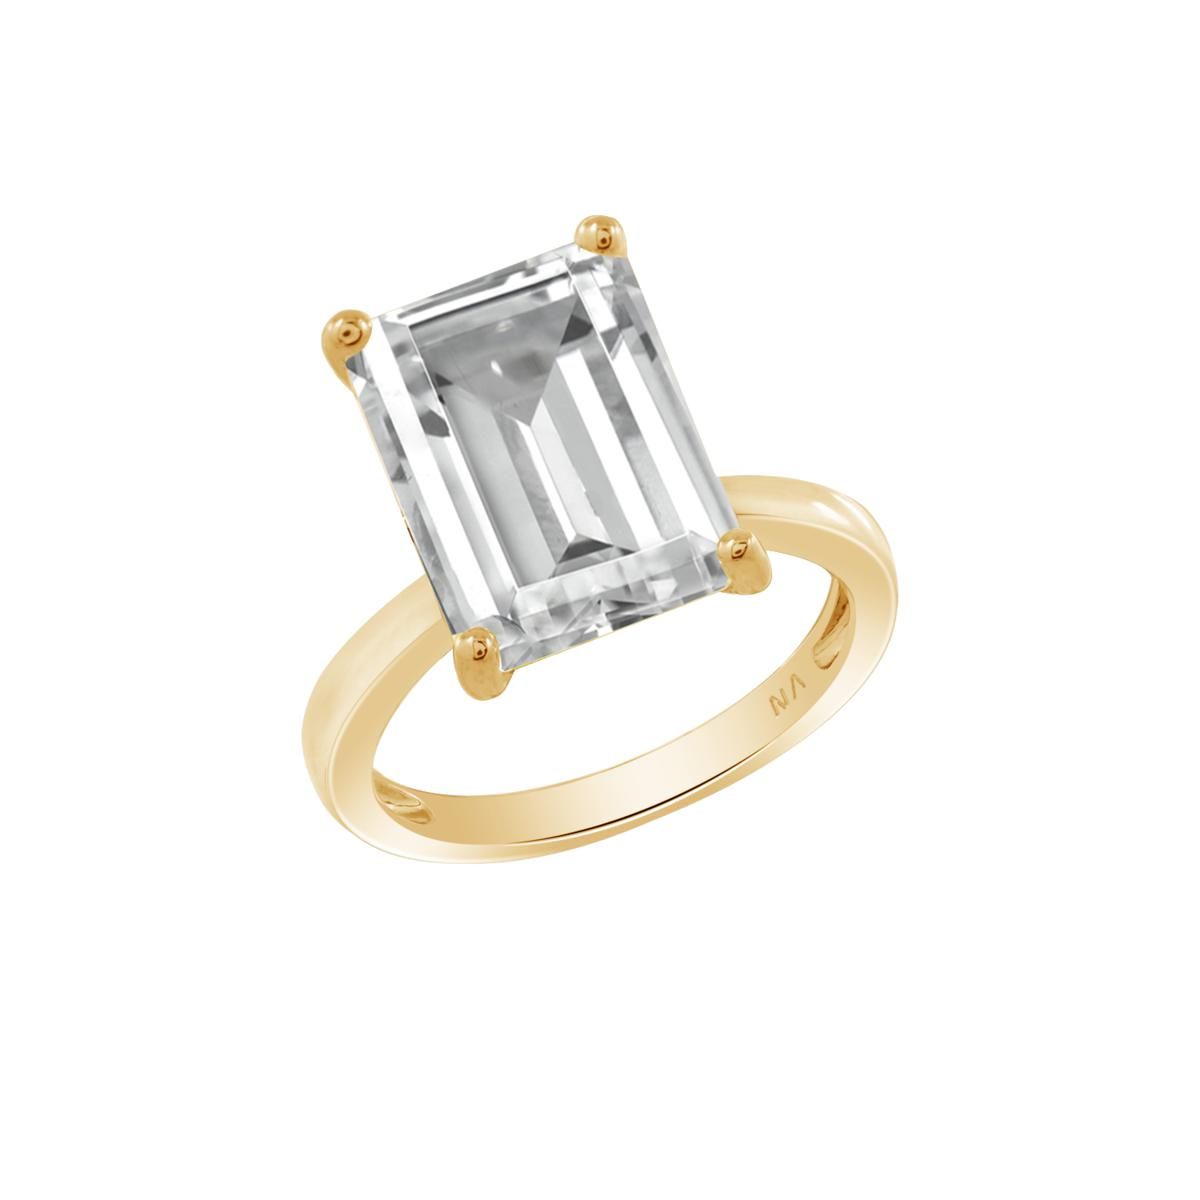 Radiance by Absolute™ 14.10ctw Emerald Cut Solitaire Ring - 23032204 | HSN | HSN